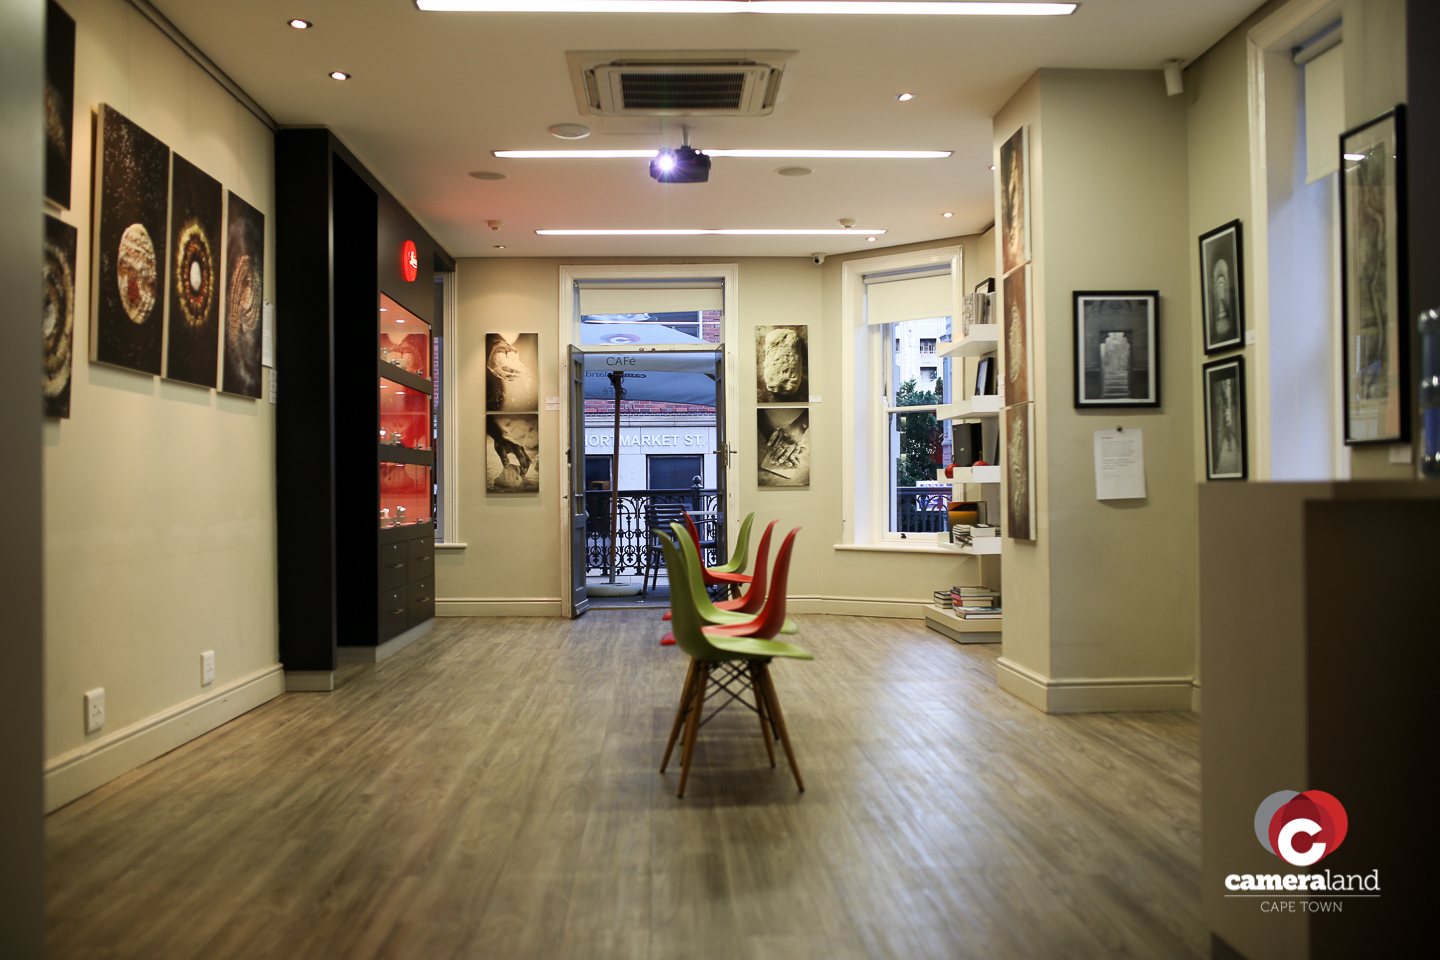 First Floor Gallery Space | Cameraland Cape Town